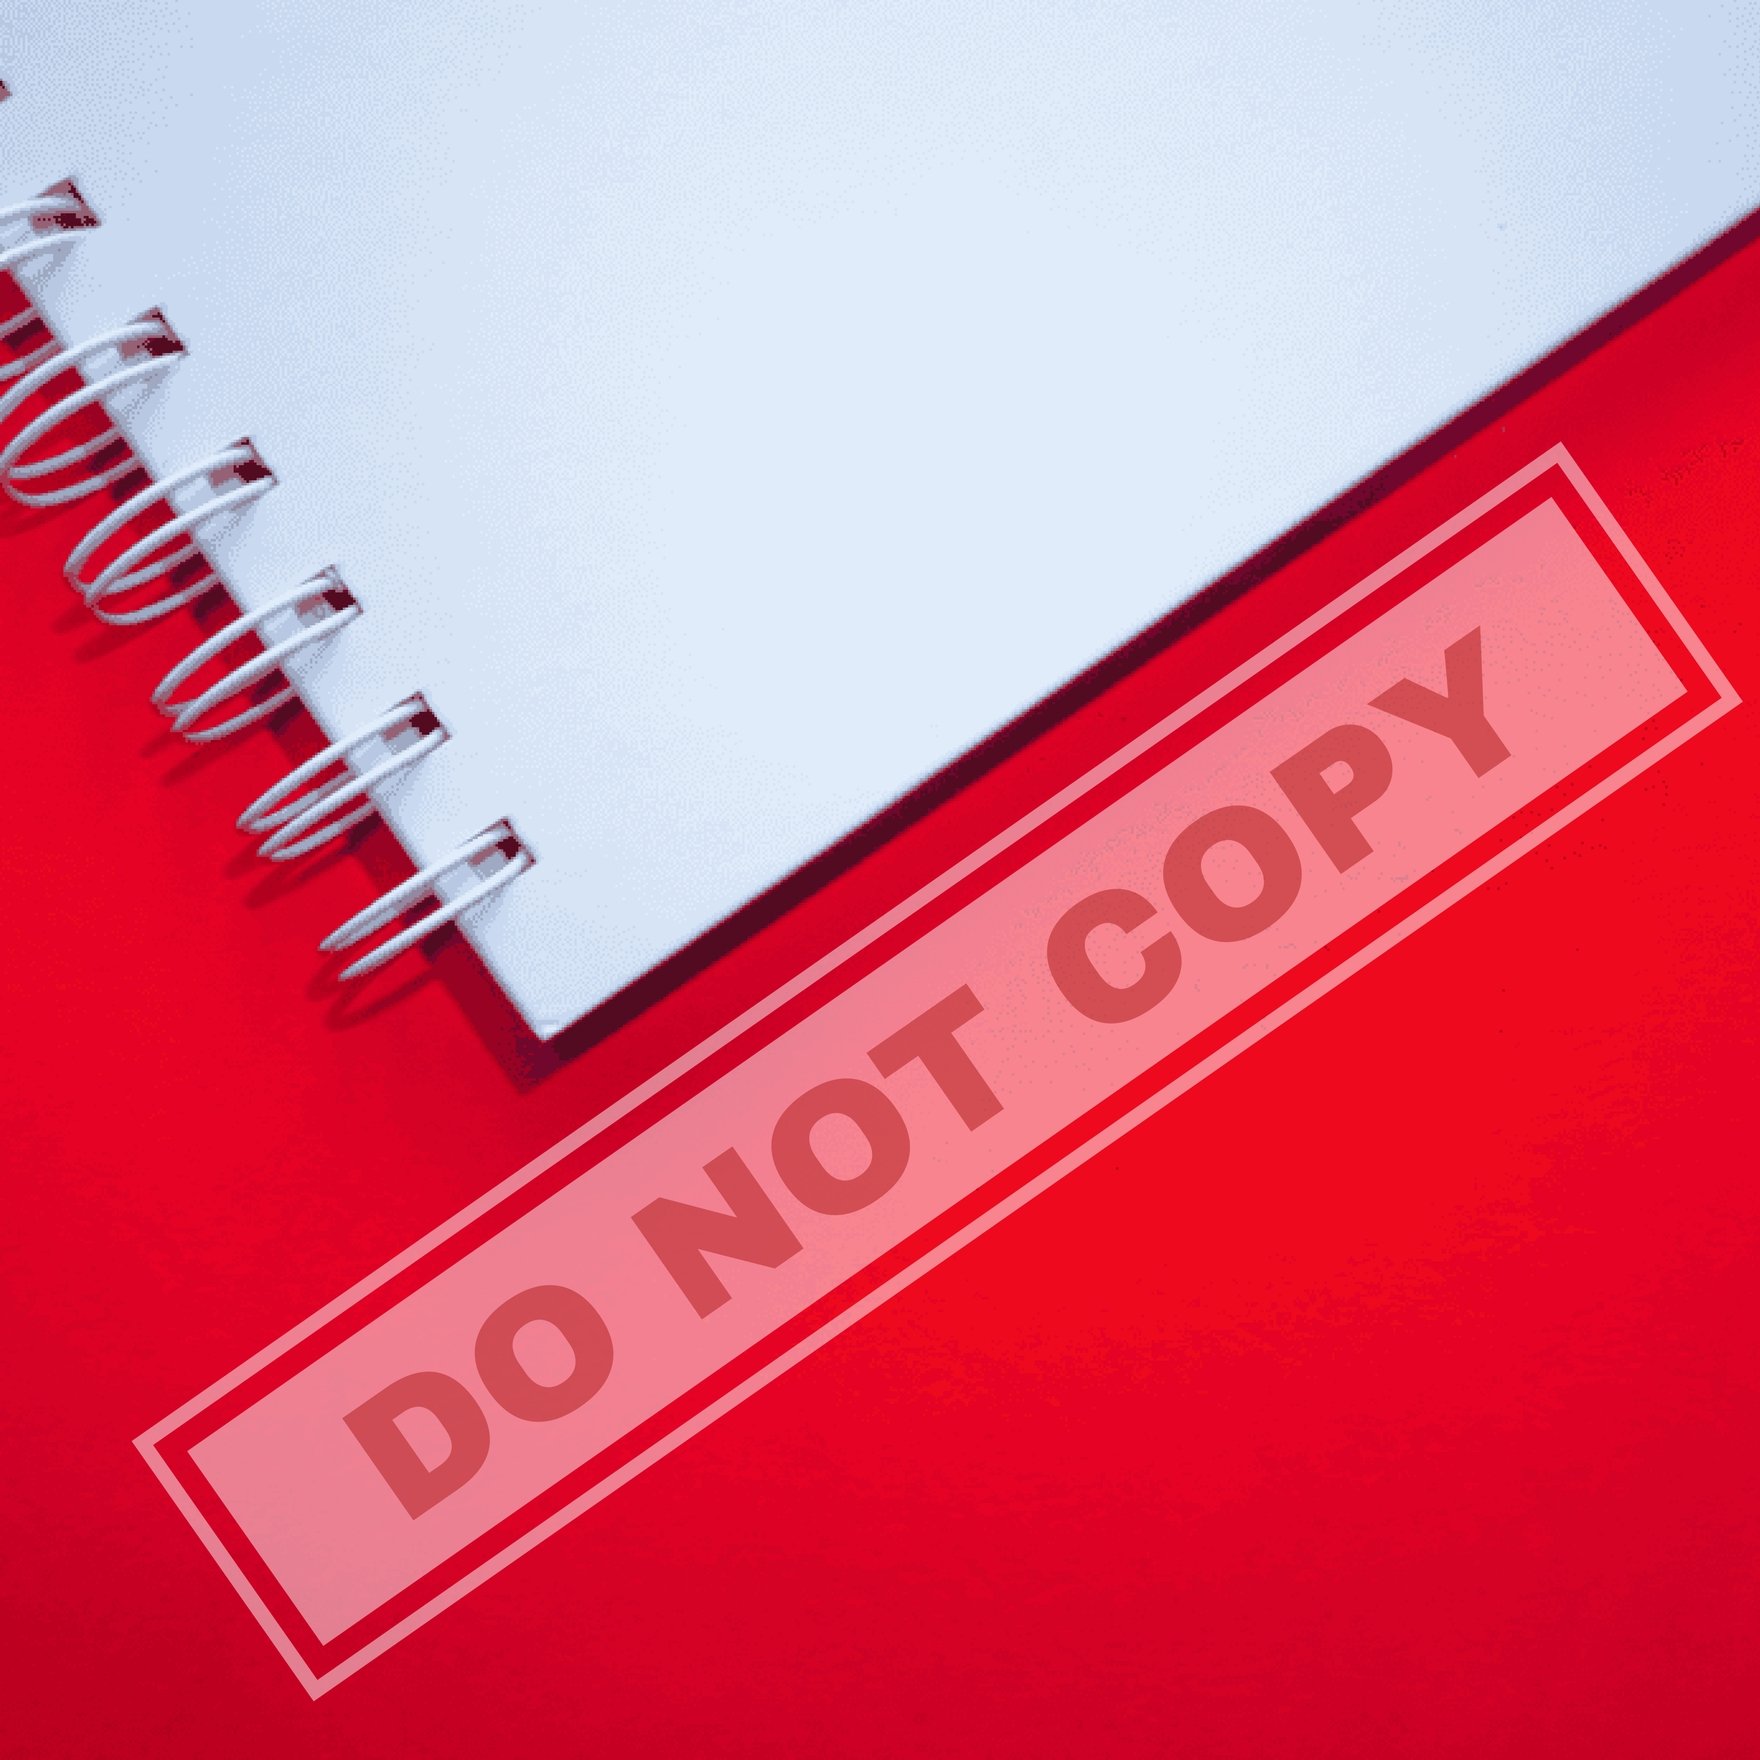 Do Not Copy Watermark Template